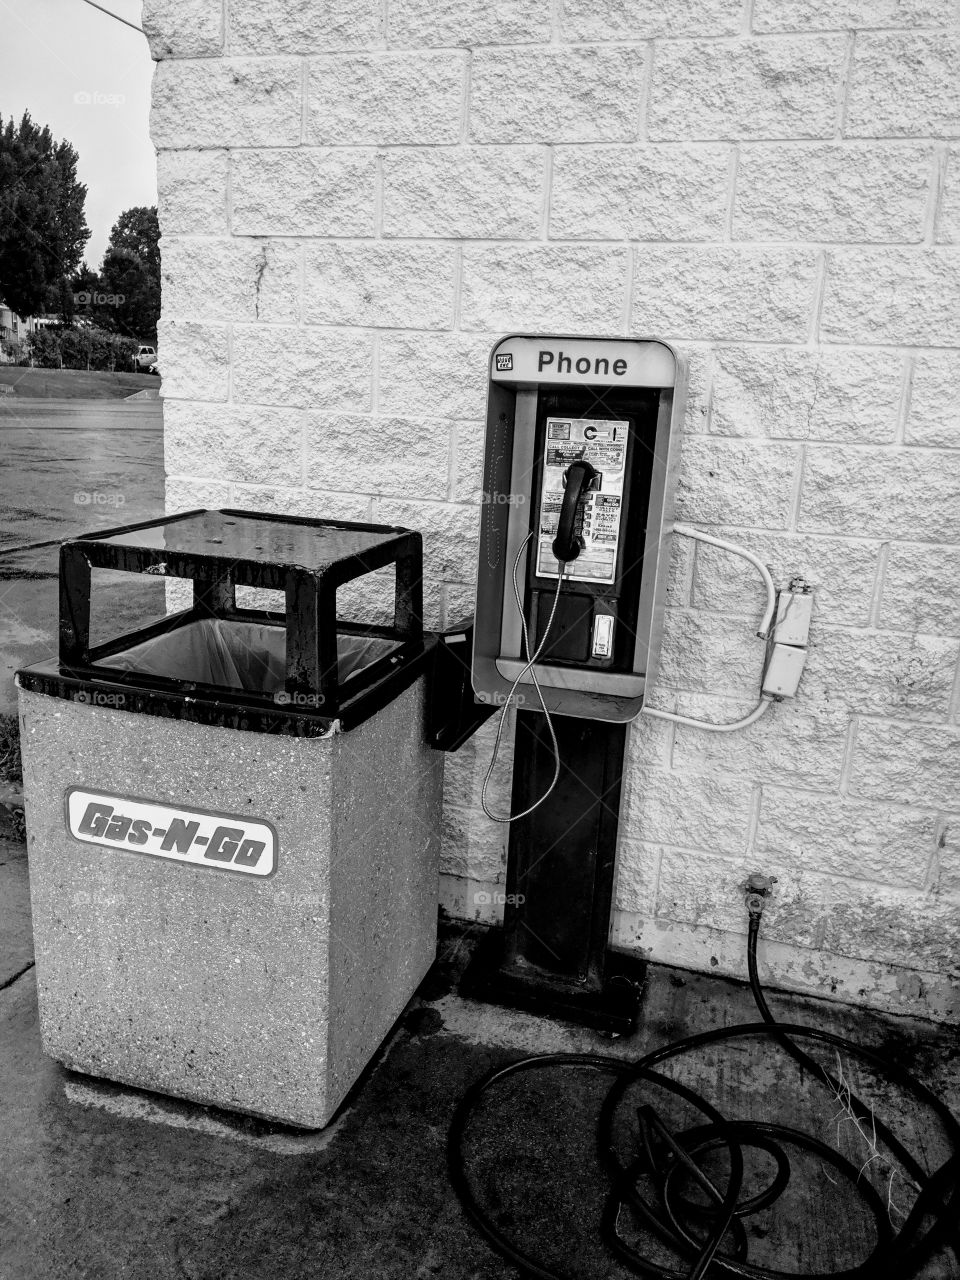 what the hell is a pay phone still doing at a gas station?